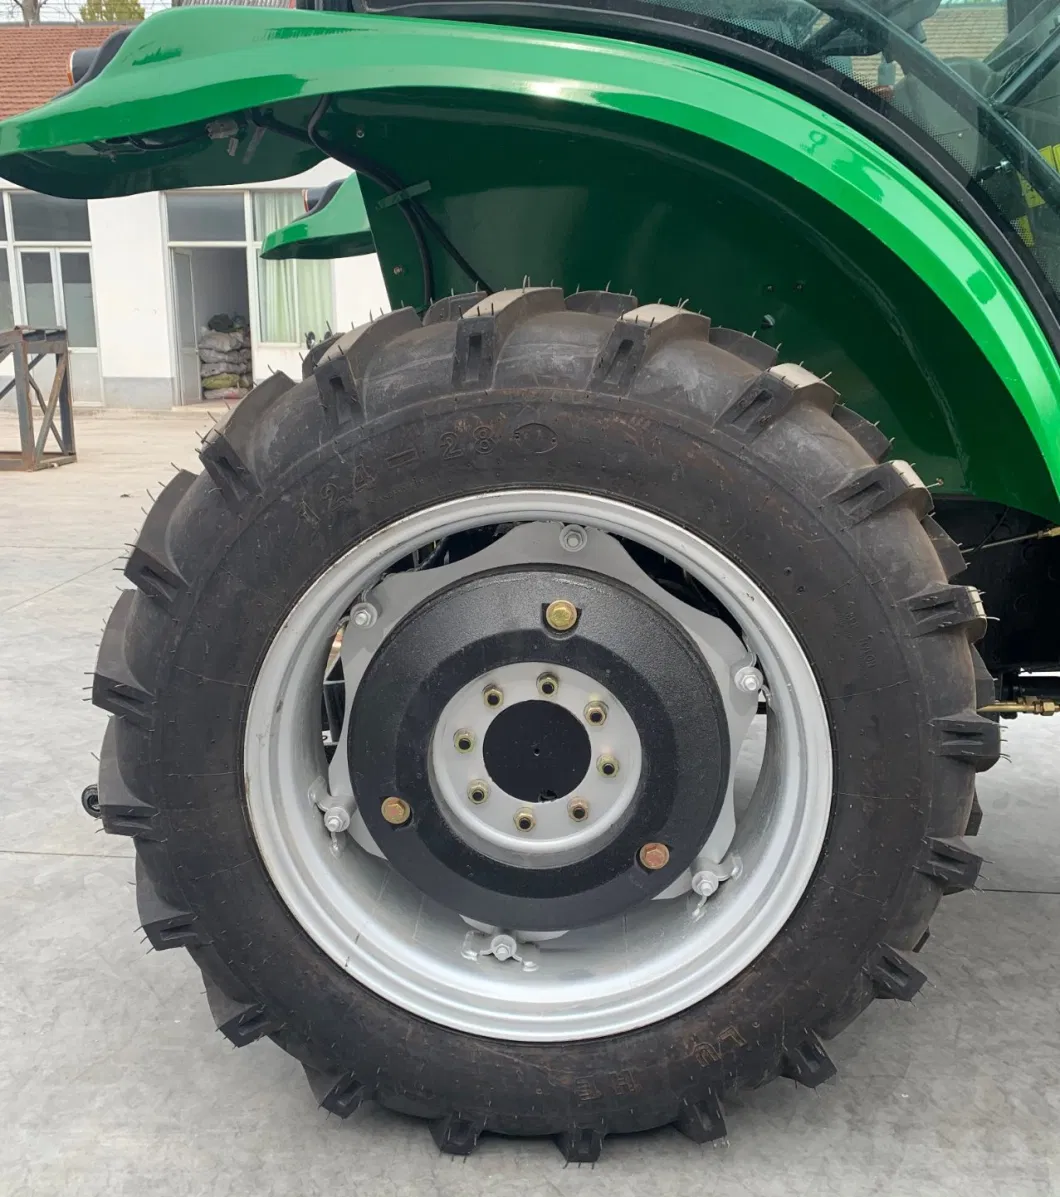 China 20 Years Factory Directly Supply 604 60 HP Garden Lawn Wheel 4WD Farm Use Tractors for Sale with Cab